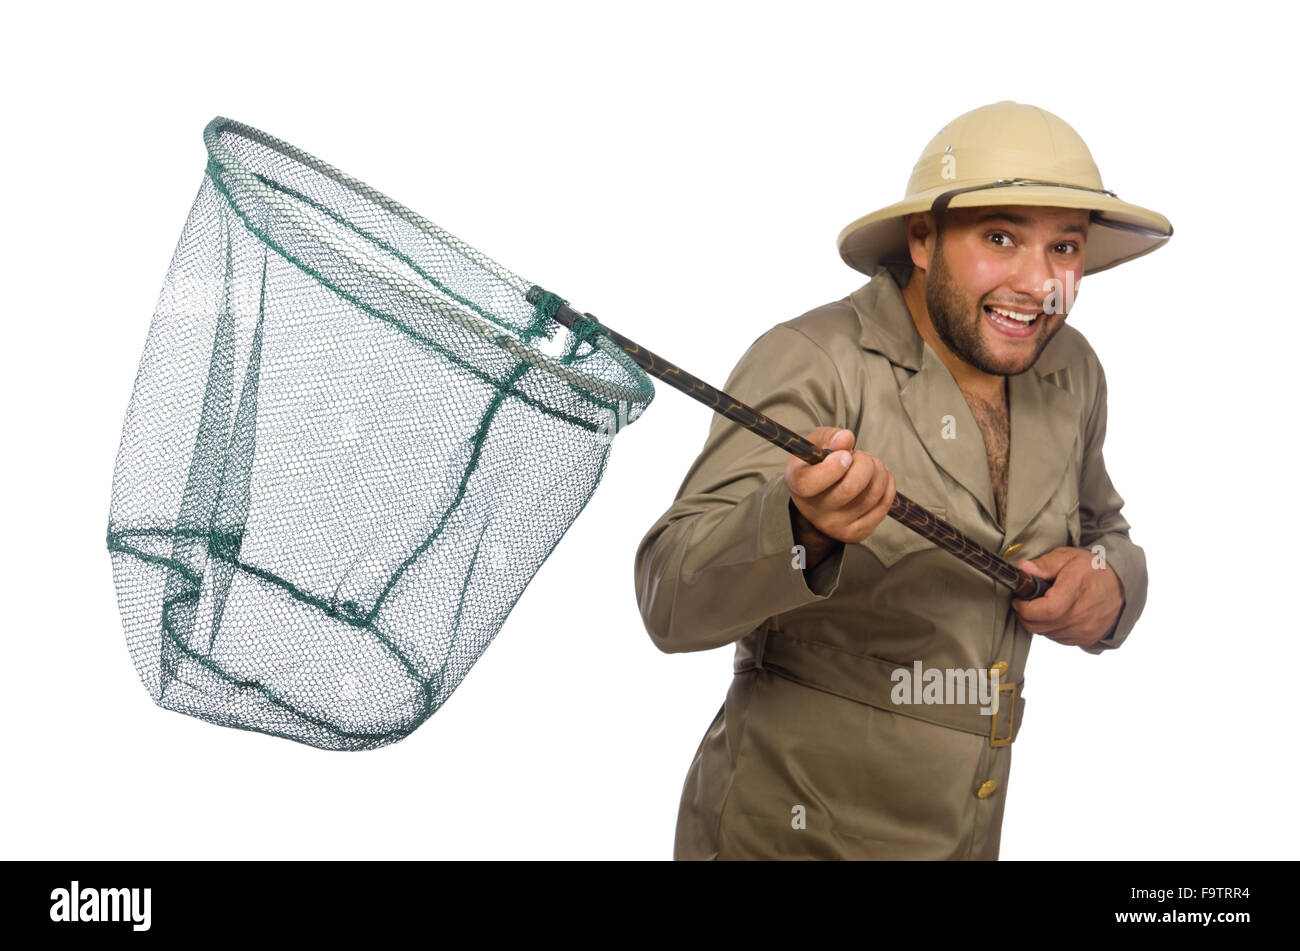 Man catching butterflies net Cut Out Stock Images & Pictures - Alamy